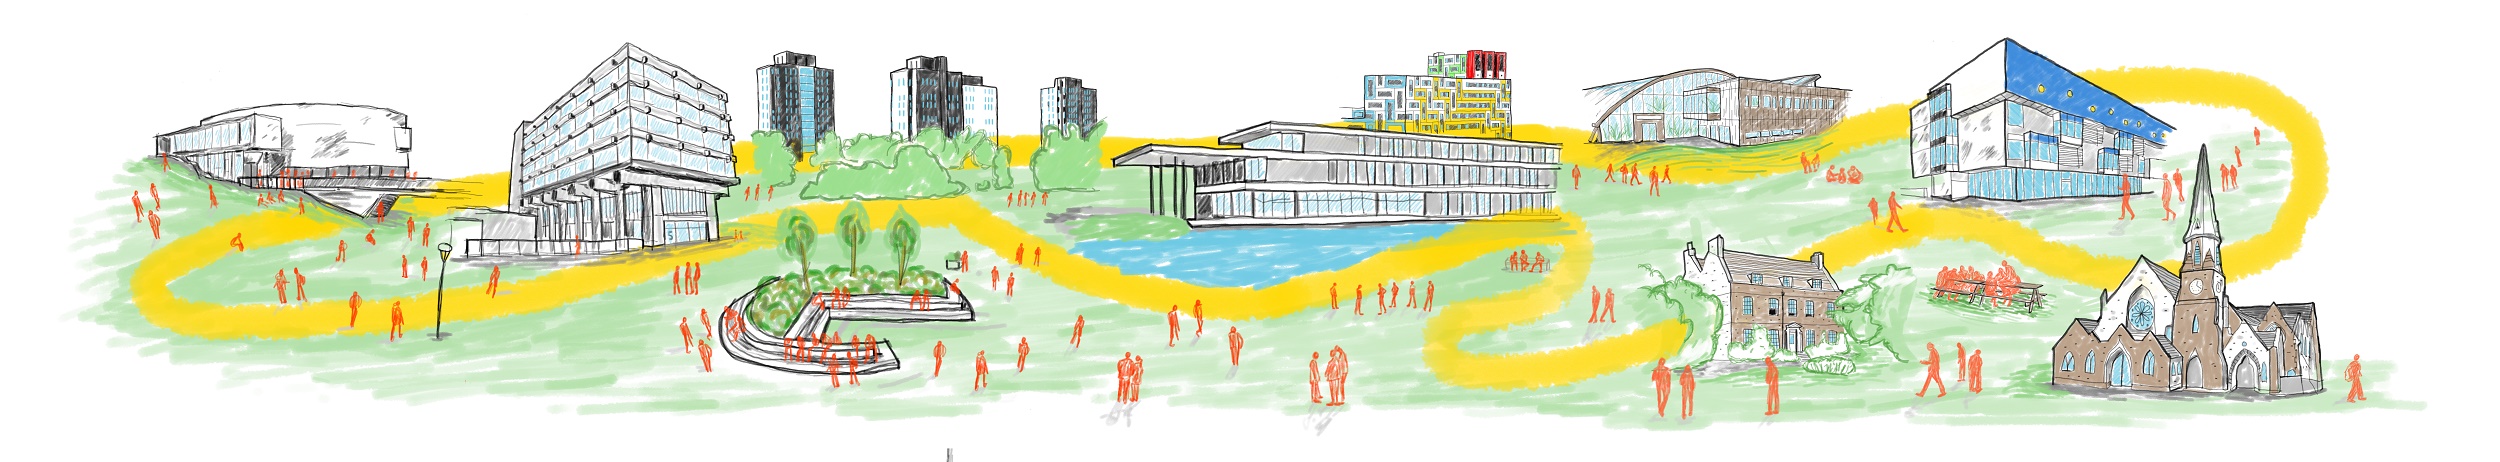 Illustration of all of the major buildings from the University's three campuses